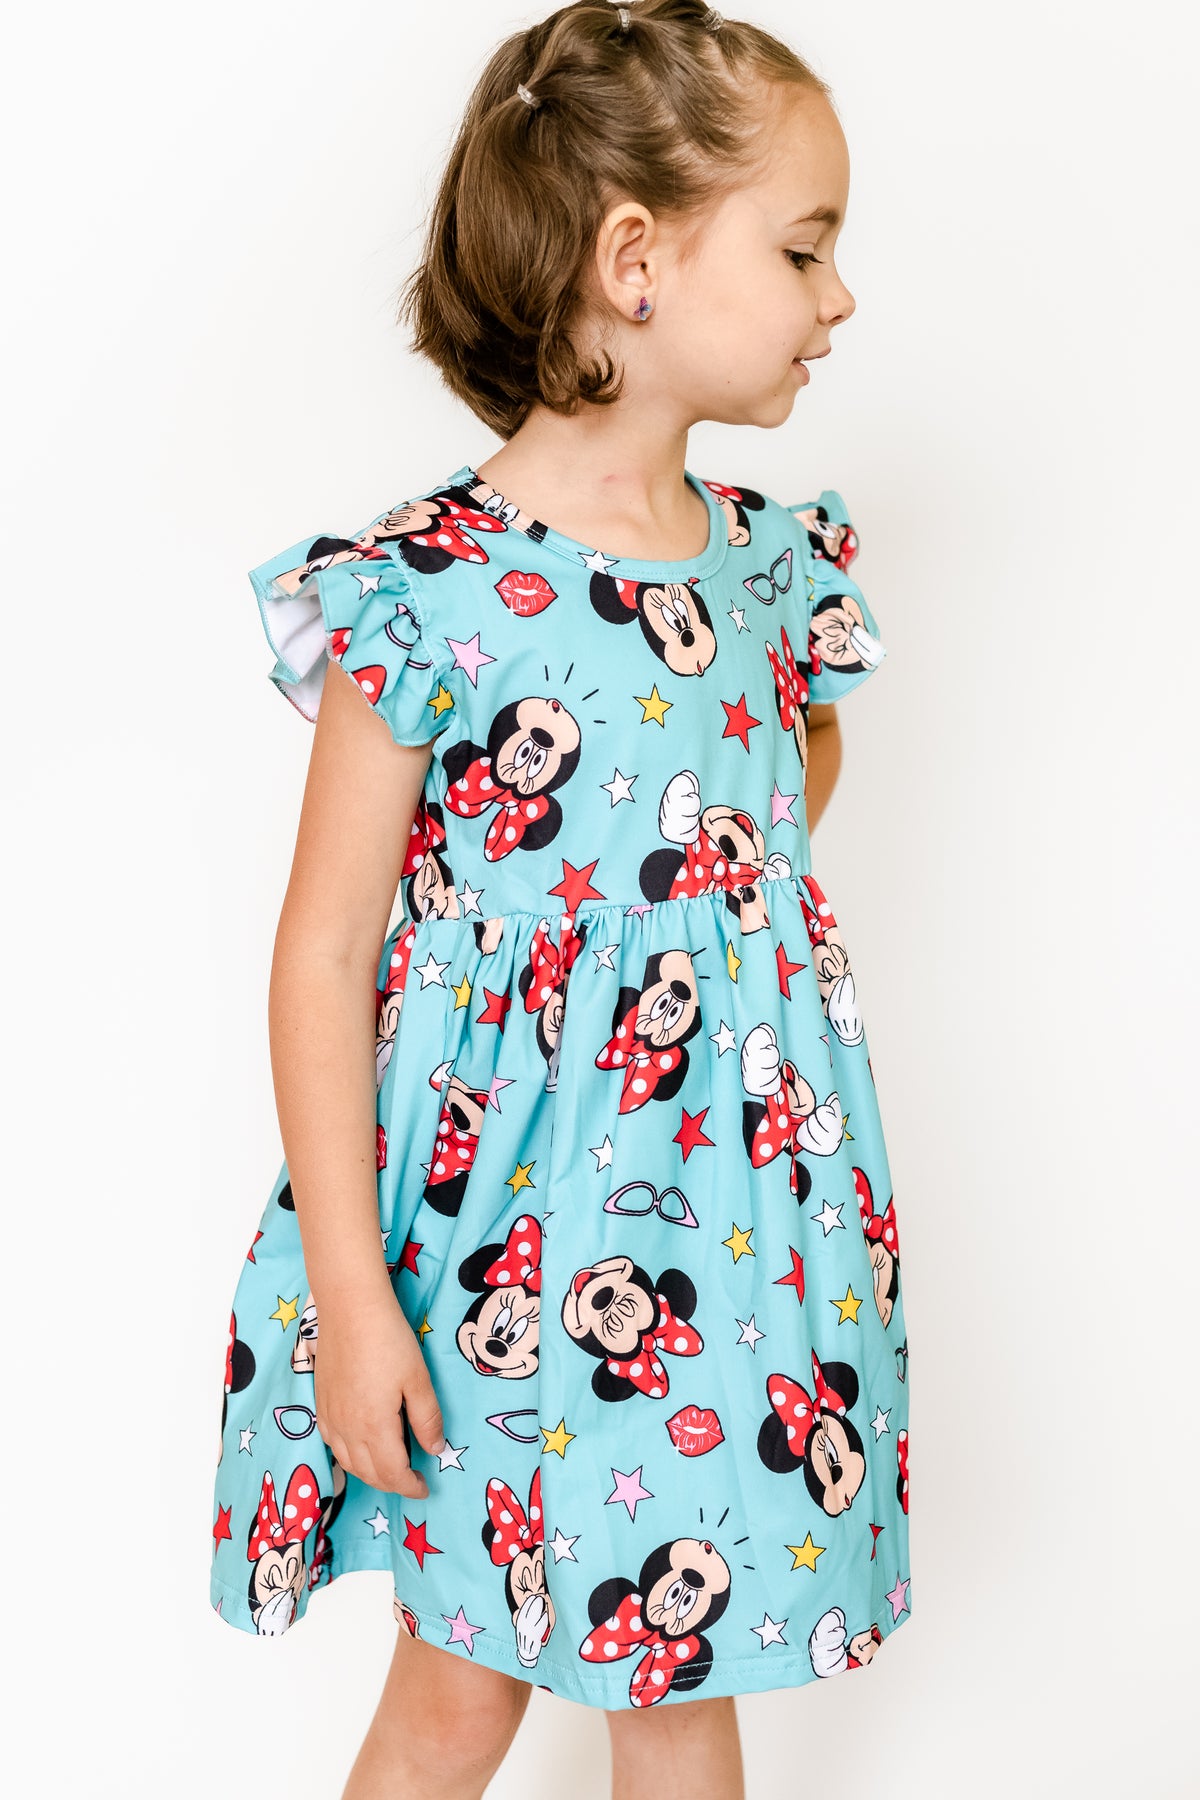 The Silly Girl Dress | Girls | Happiest Place Collection